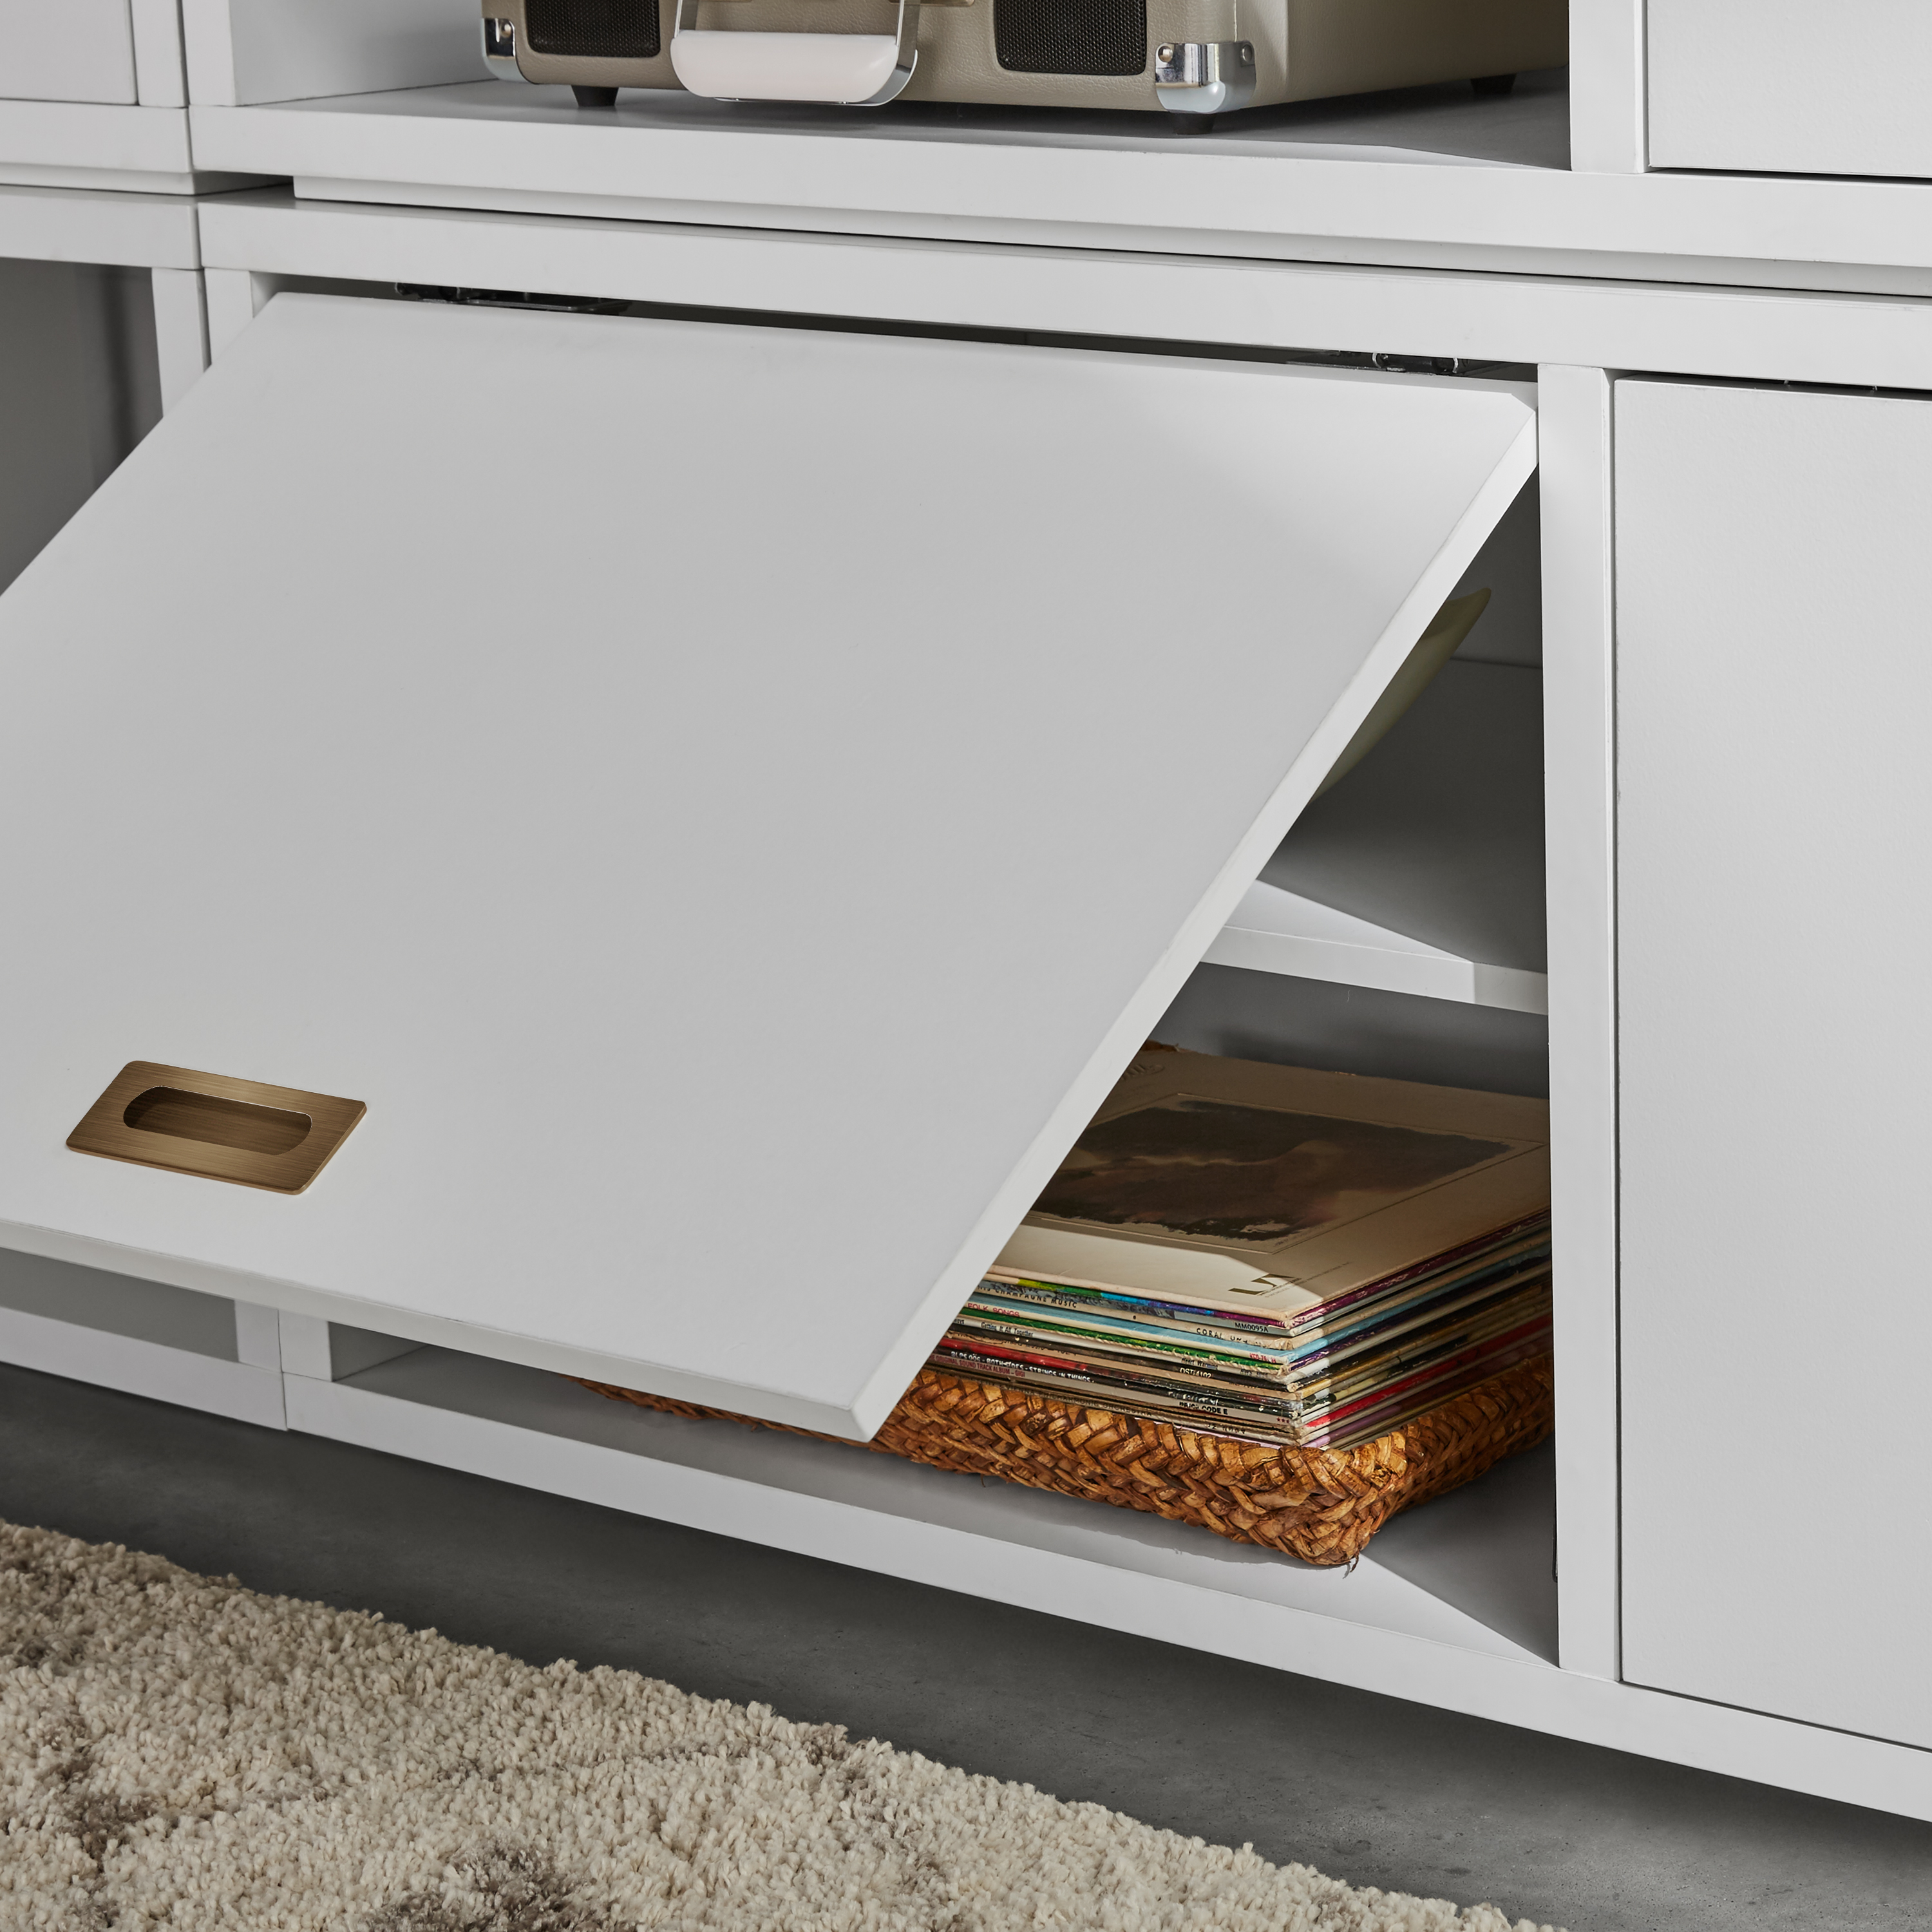 Better Homes & Gardens Ludlow Storage Cabinet with Adjustable Shelves, White - image 2 of 8